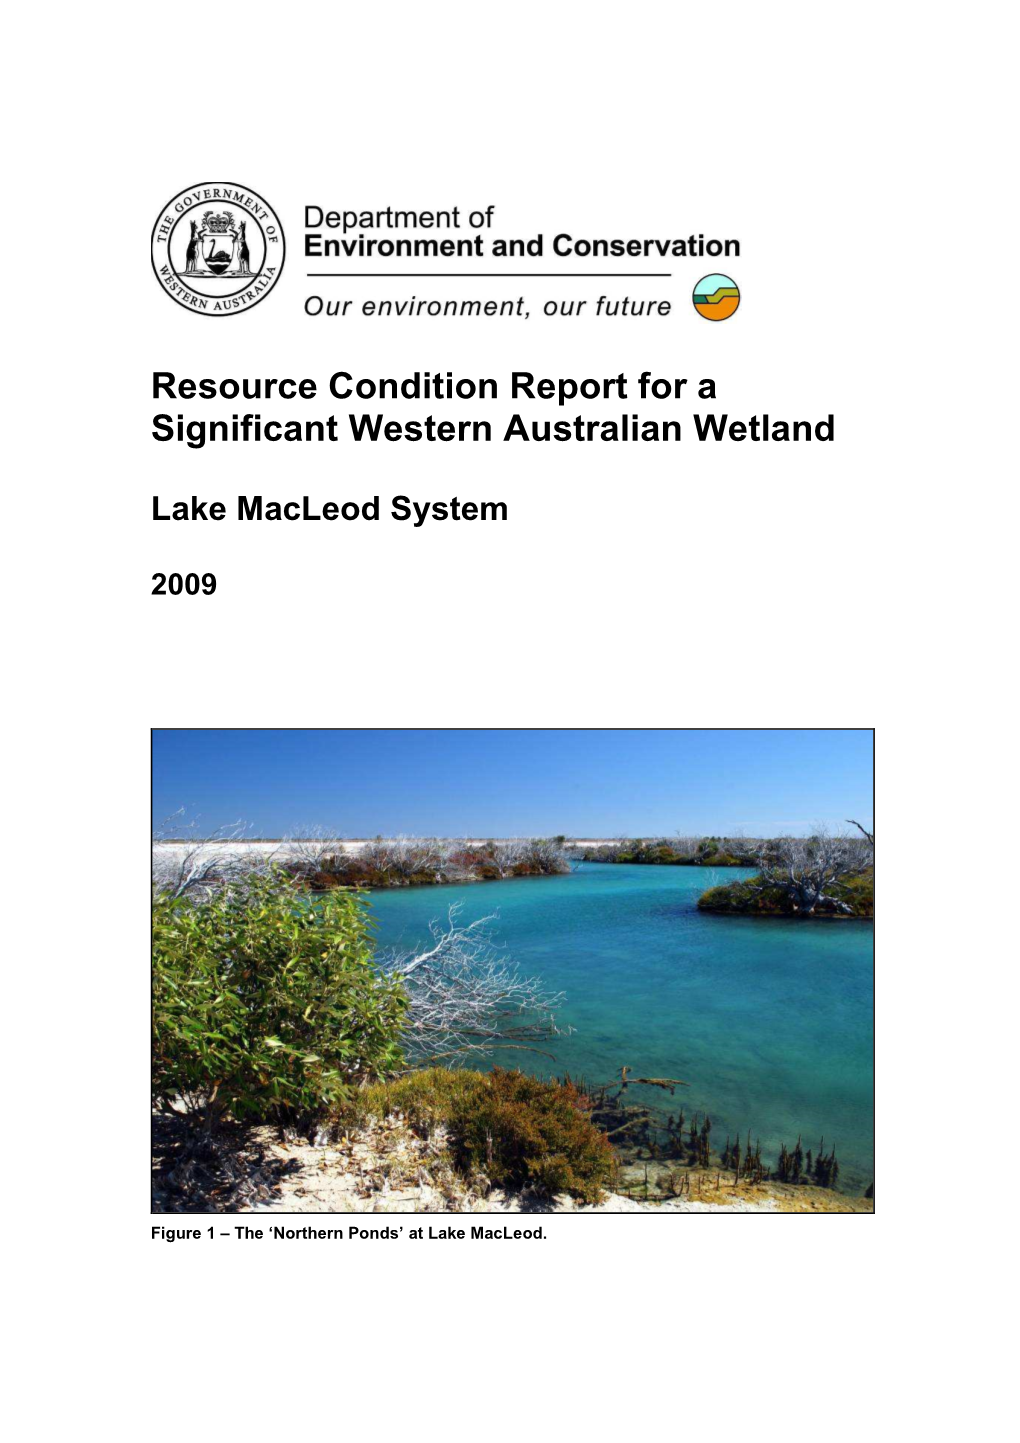 RCM029 Lake Macleod Condition Report